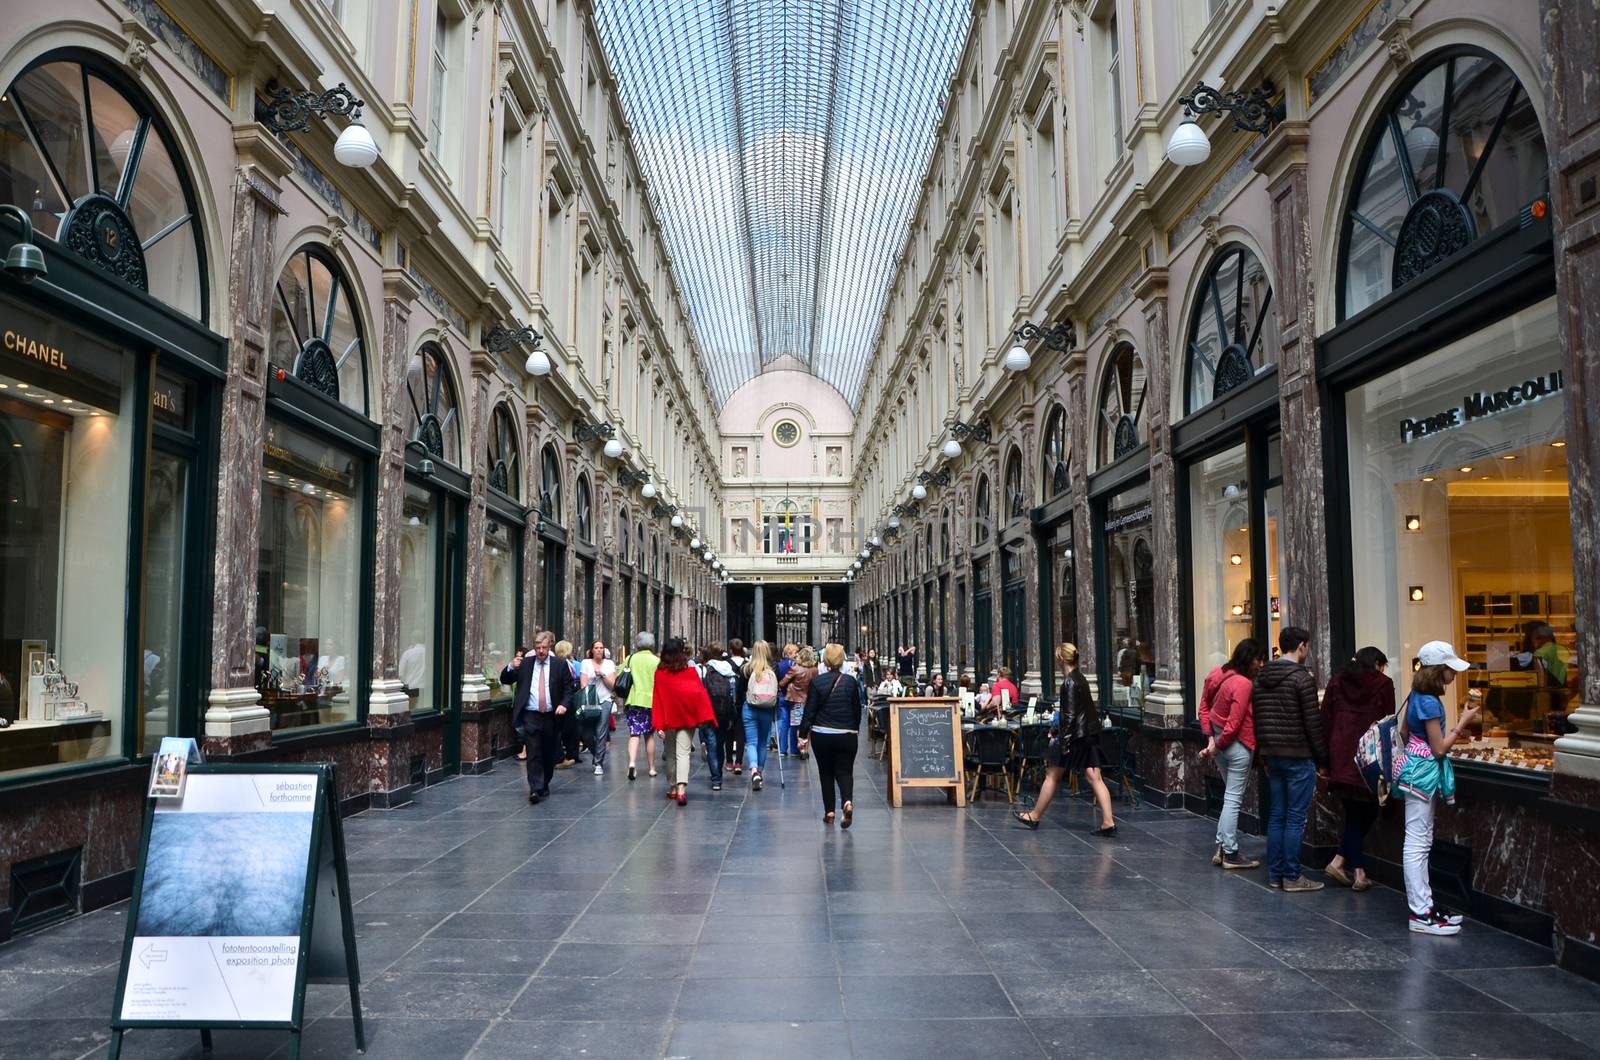 Brussels, Belgium - May 12, 2015: Tourists shopping at The Galeries Royales Saint-Hubert in Brussels by siraanamwong